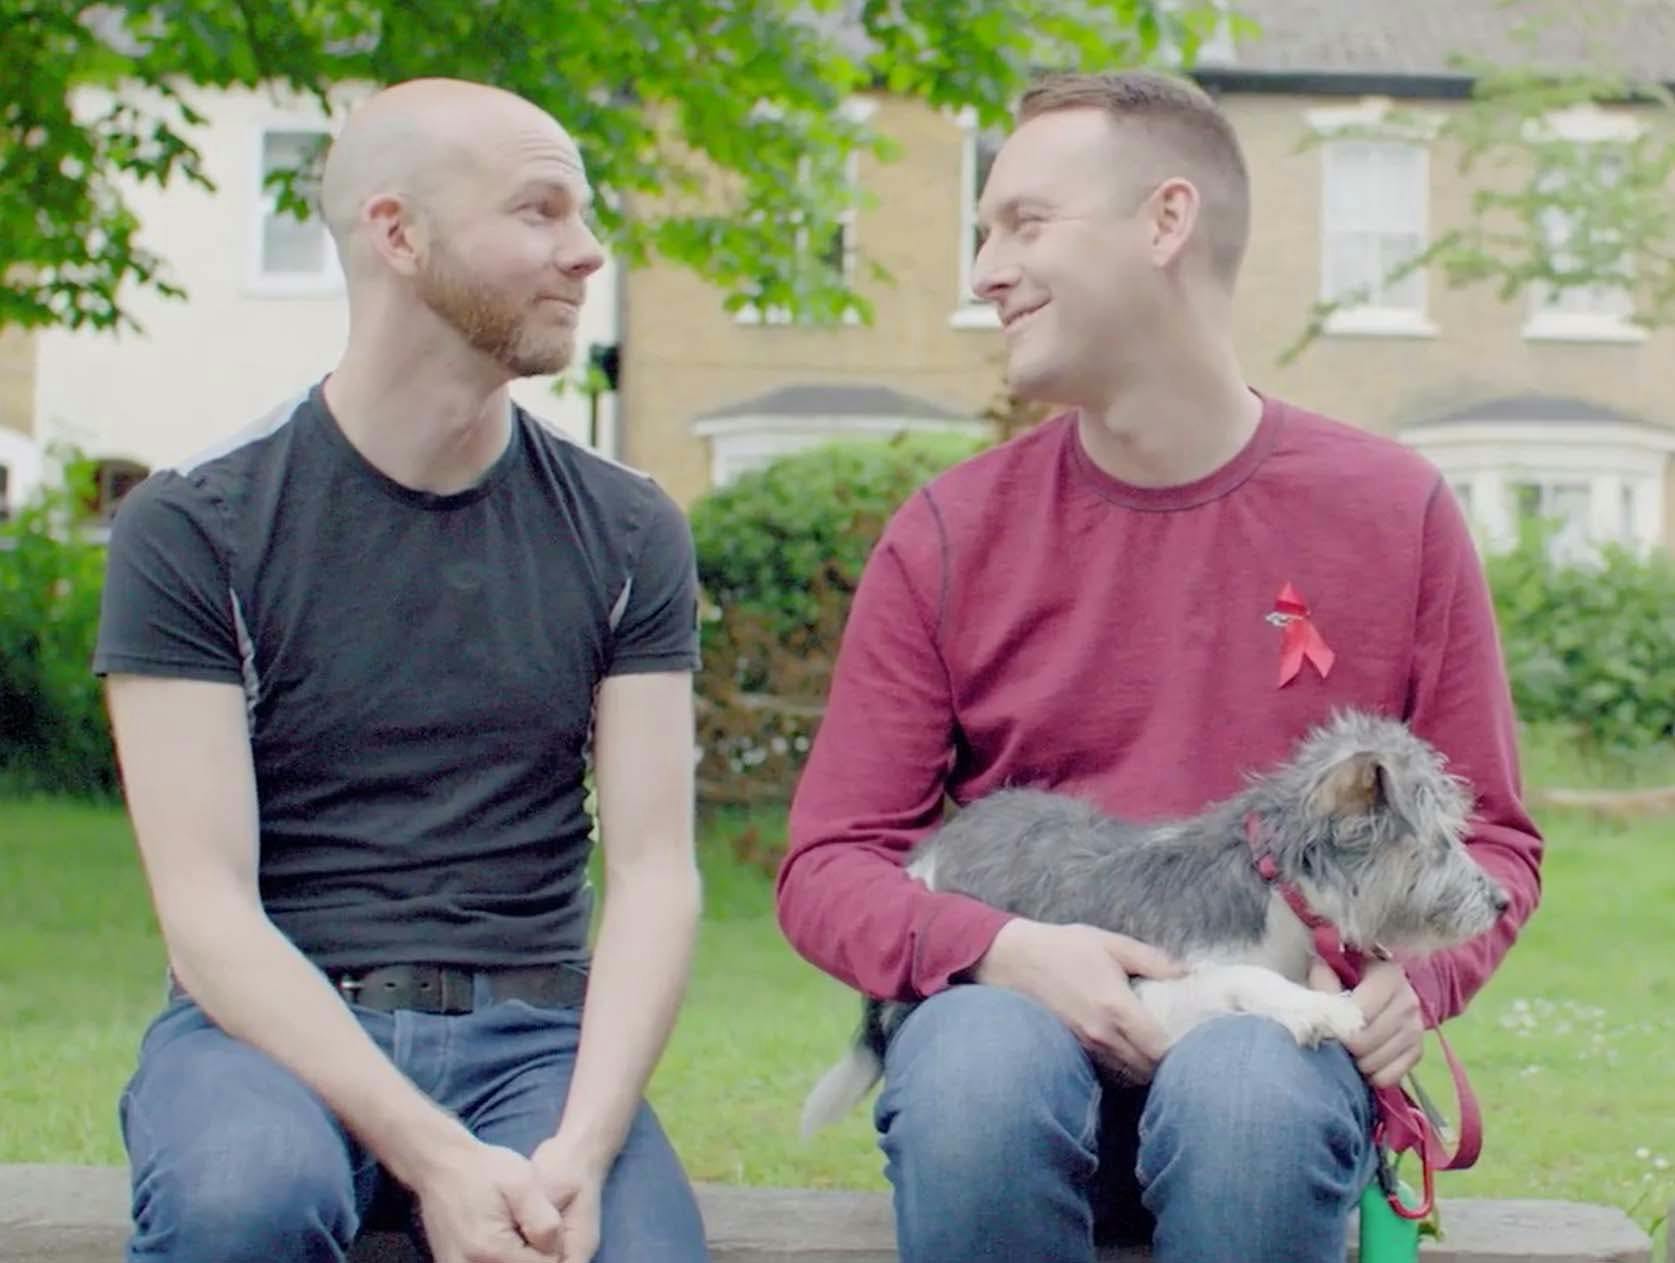 Two men looking at each other, one holding a dog